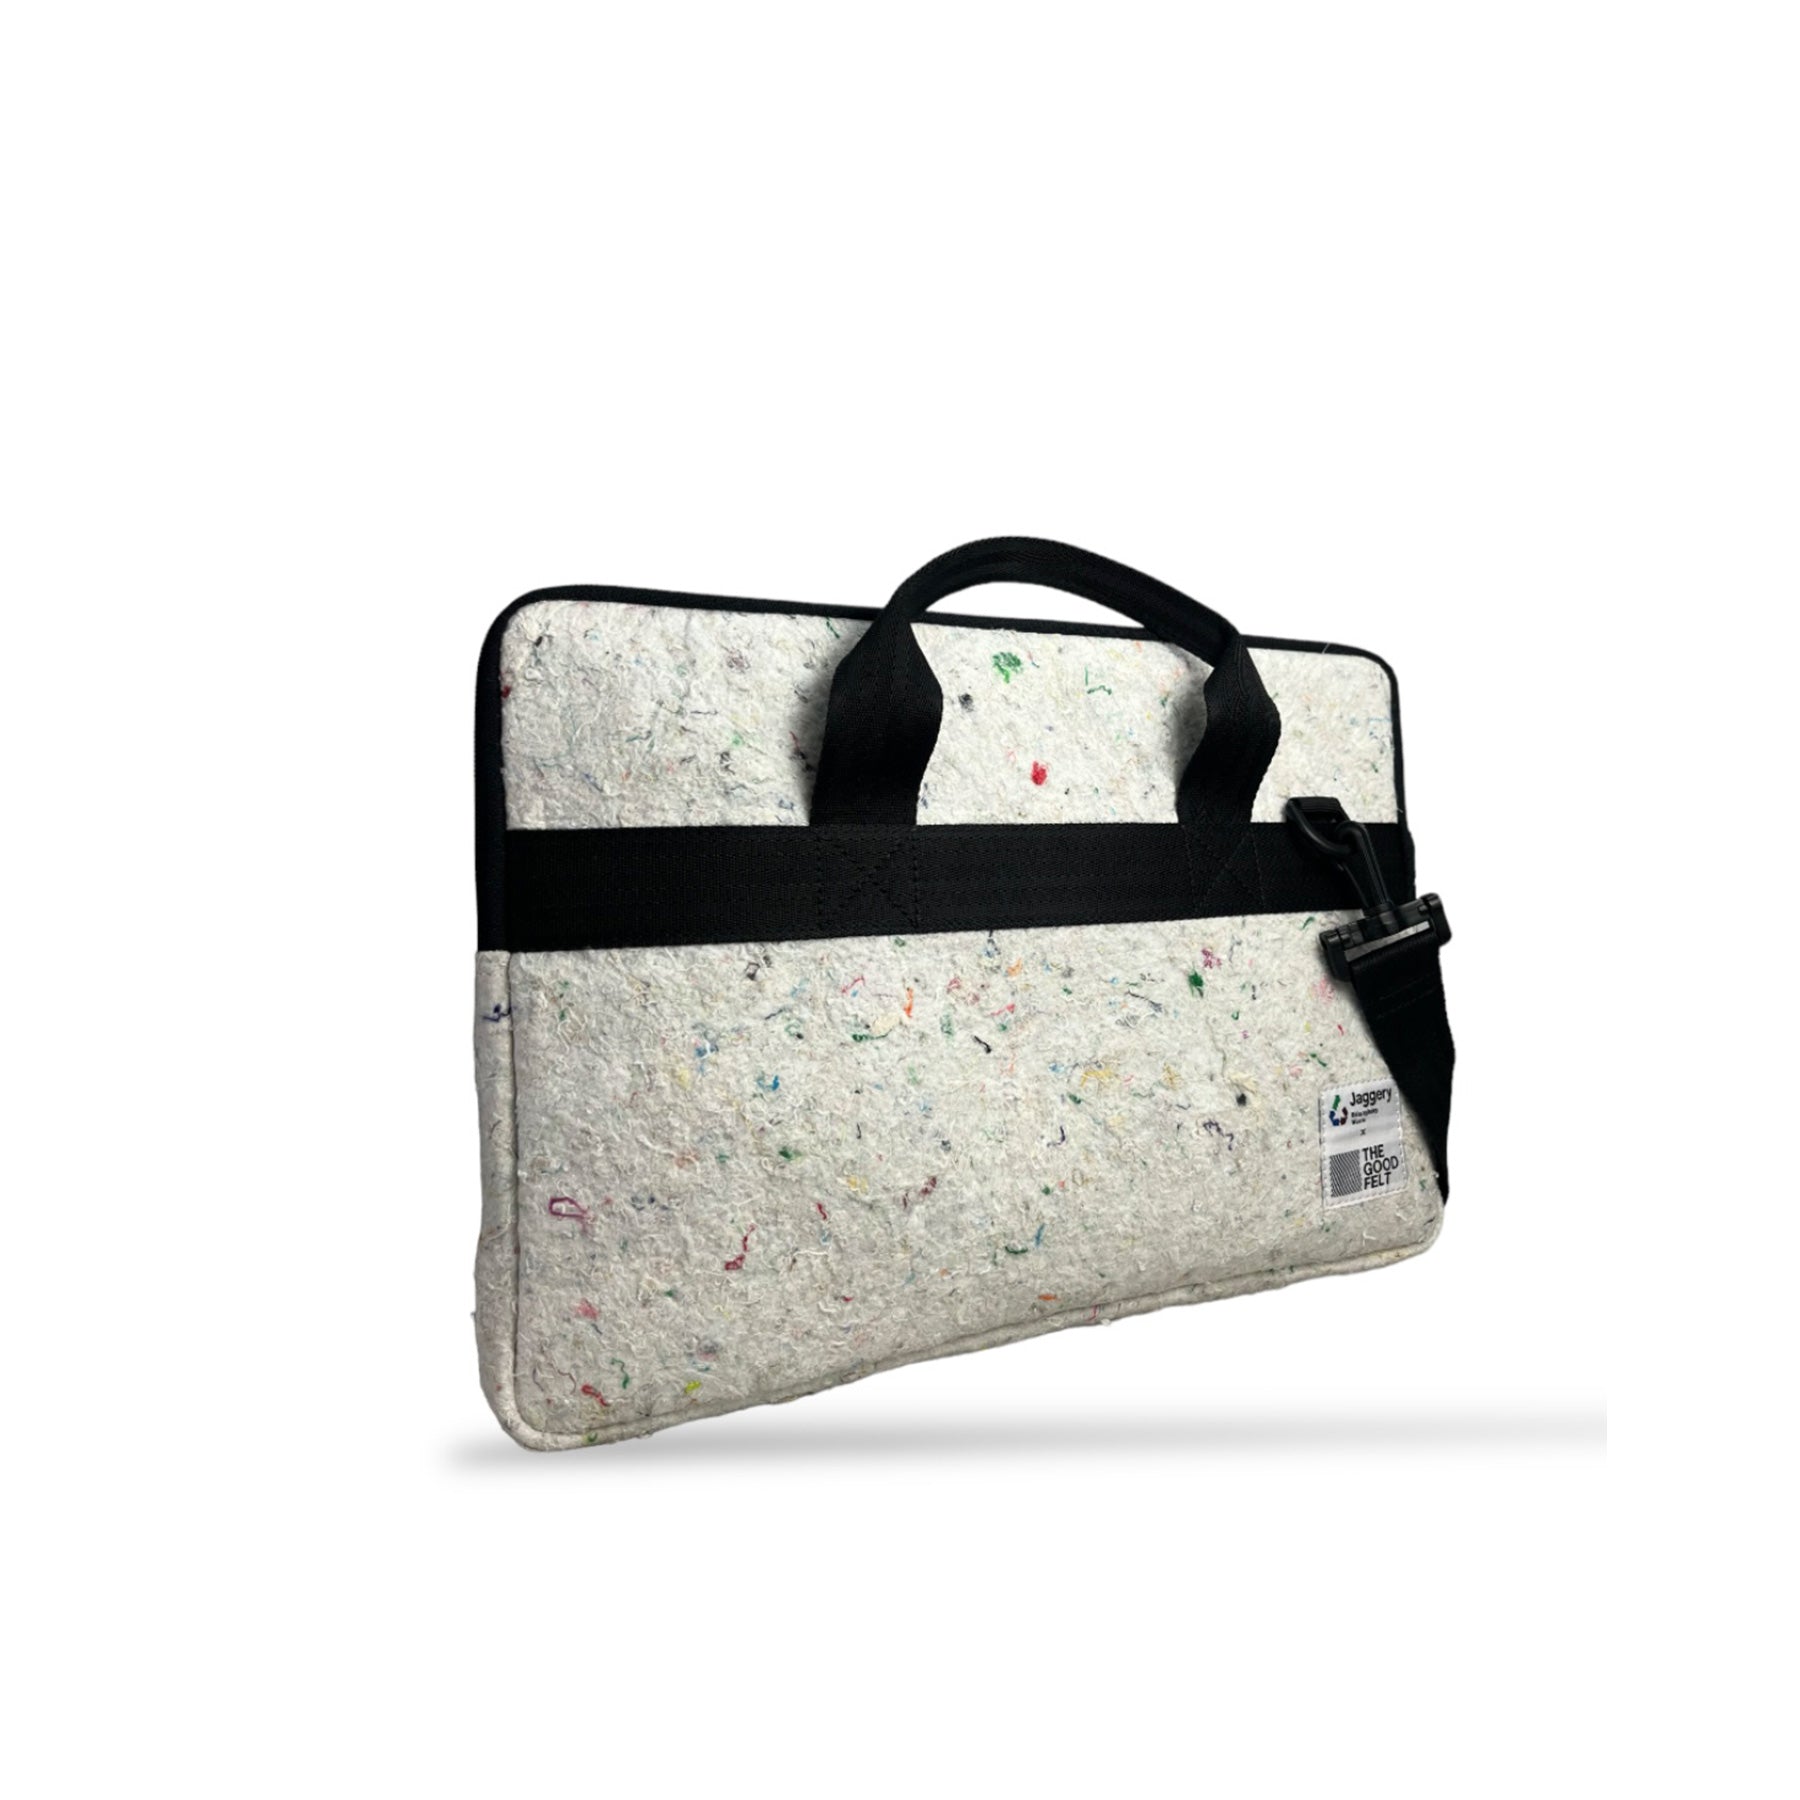 The Good Laptop Sleeve (15") in White Felt and Rescued Black Car Seat Belts